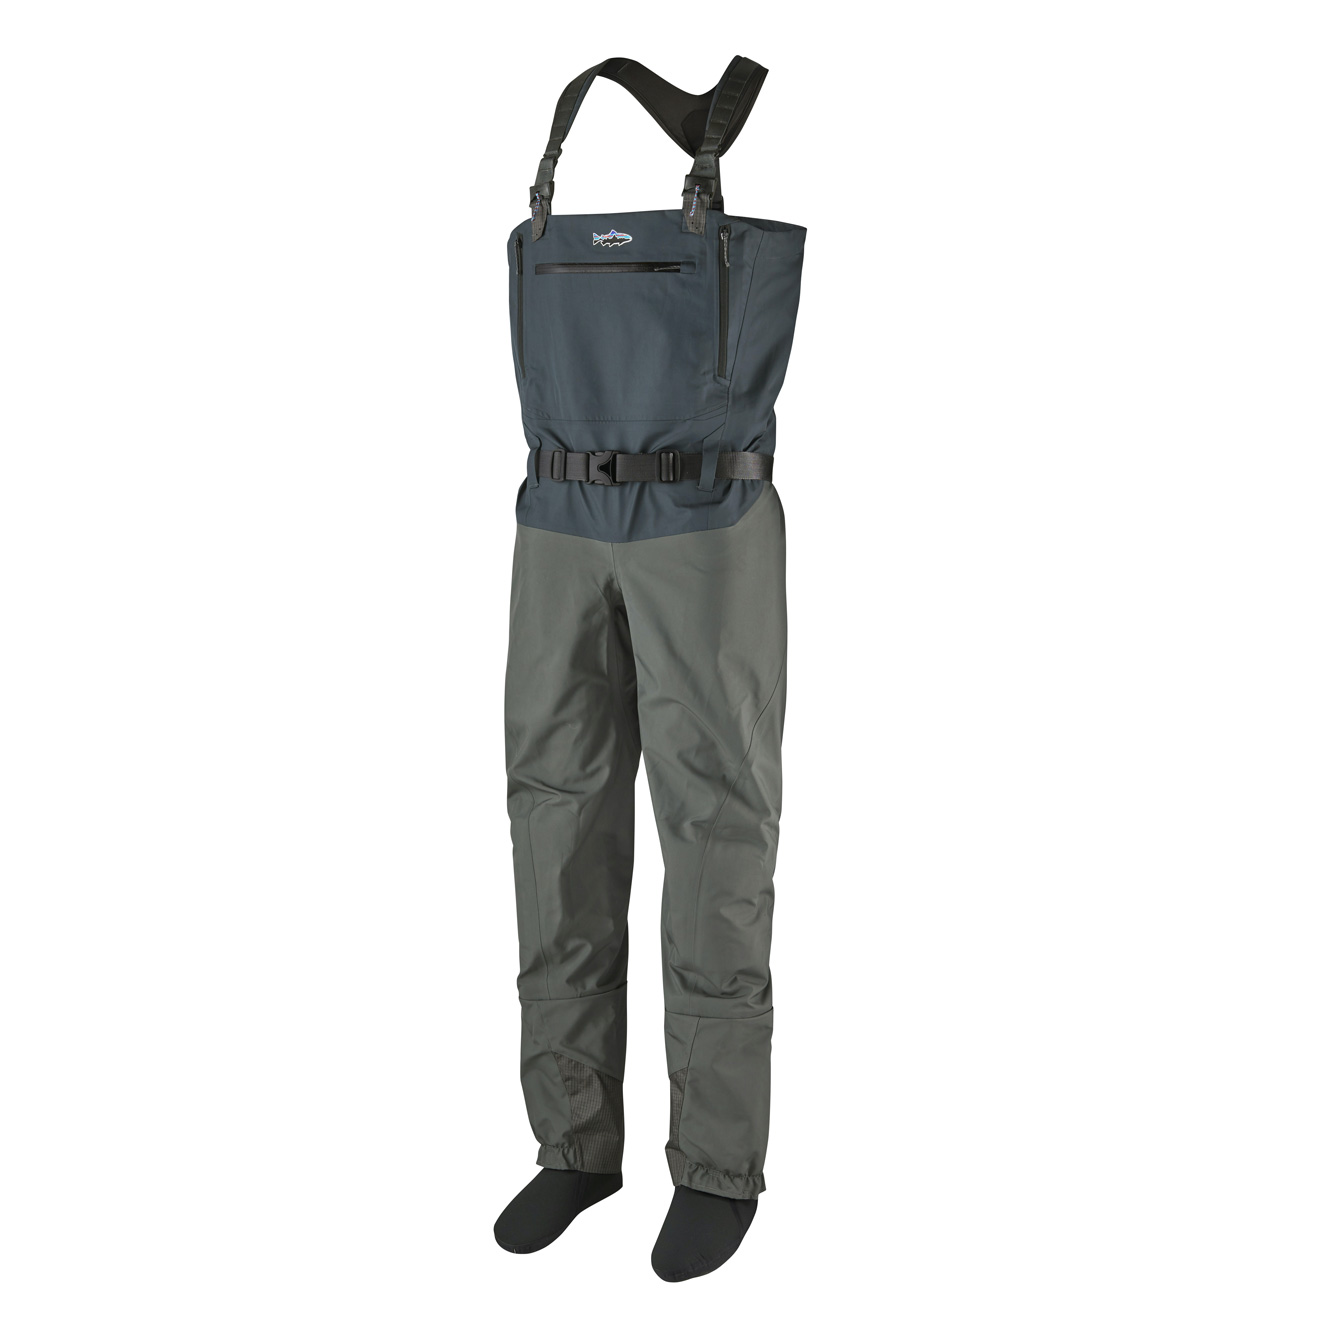 Patagonia Men's Swiftcurrent Expedition Wader - 3LL